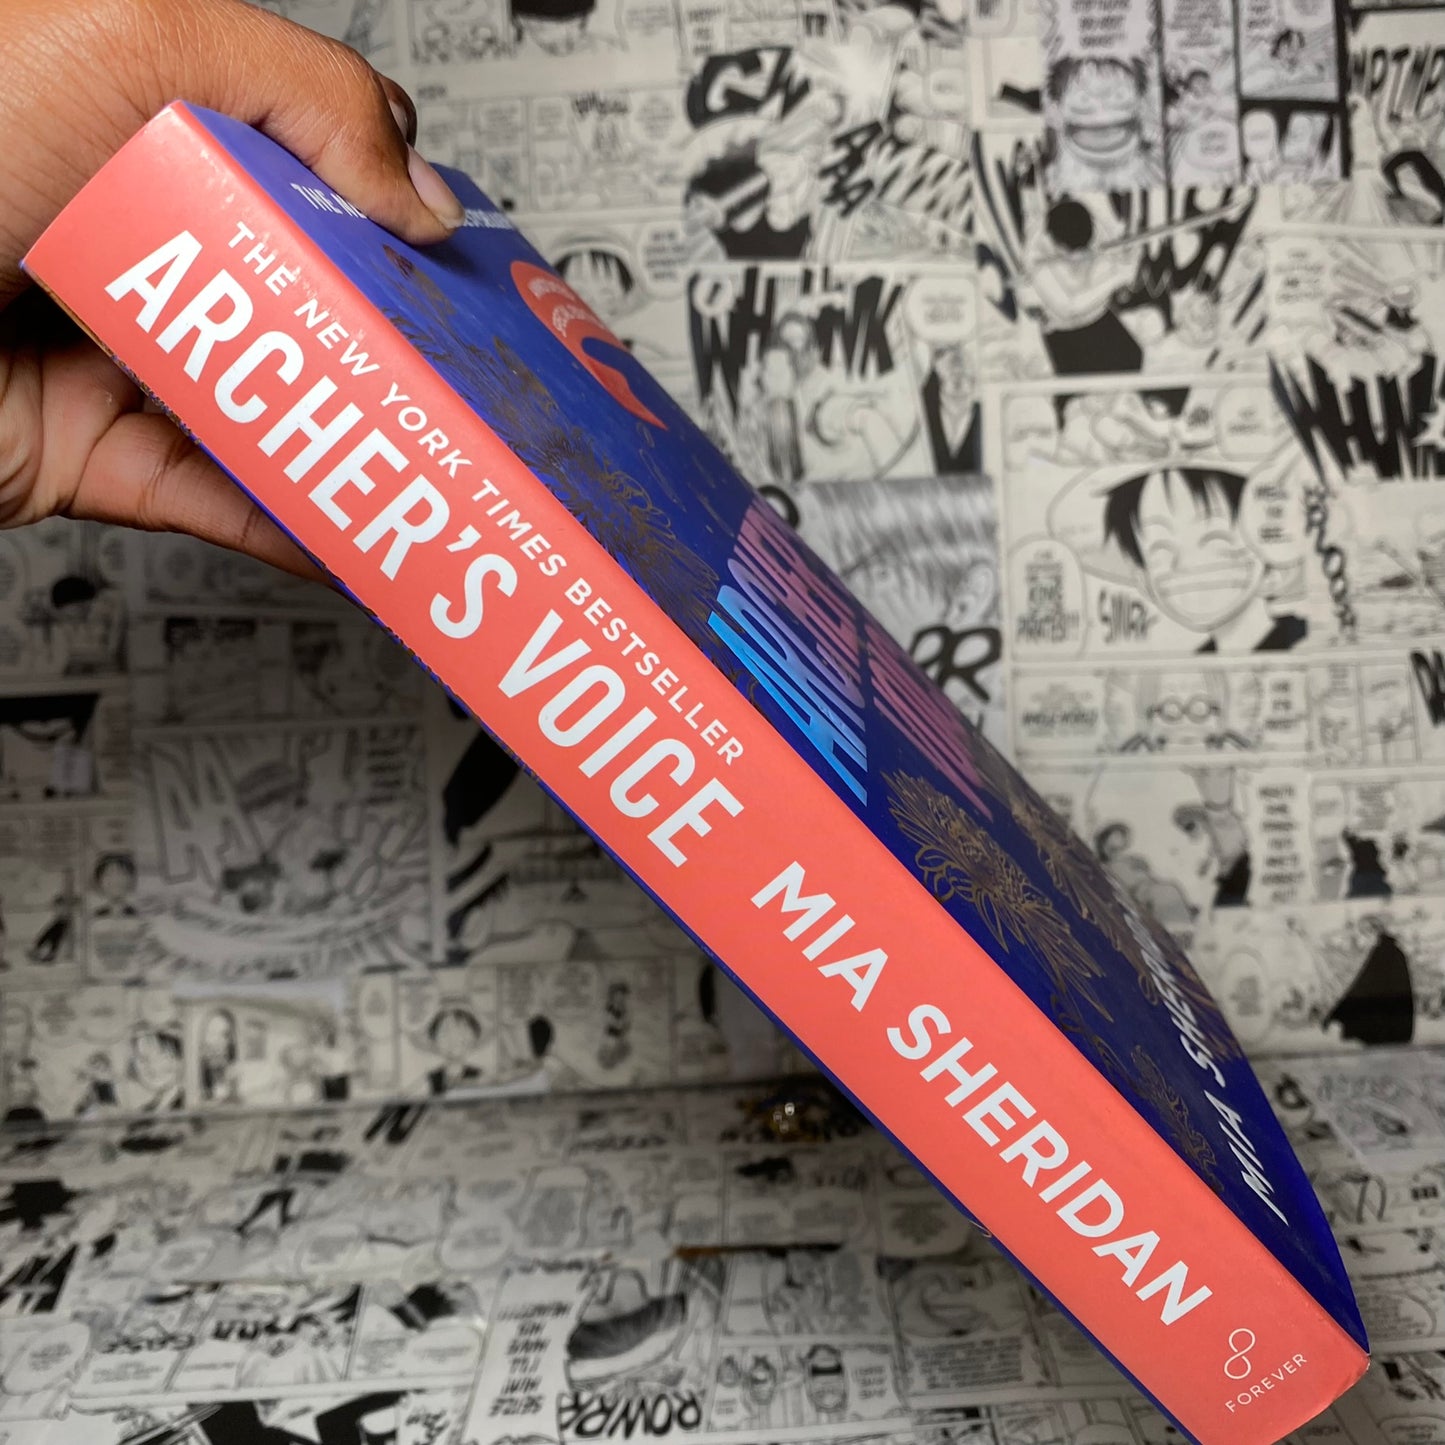 Archer's Voice Hardcover Special Edition by Mia Sheridan